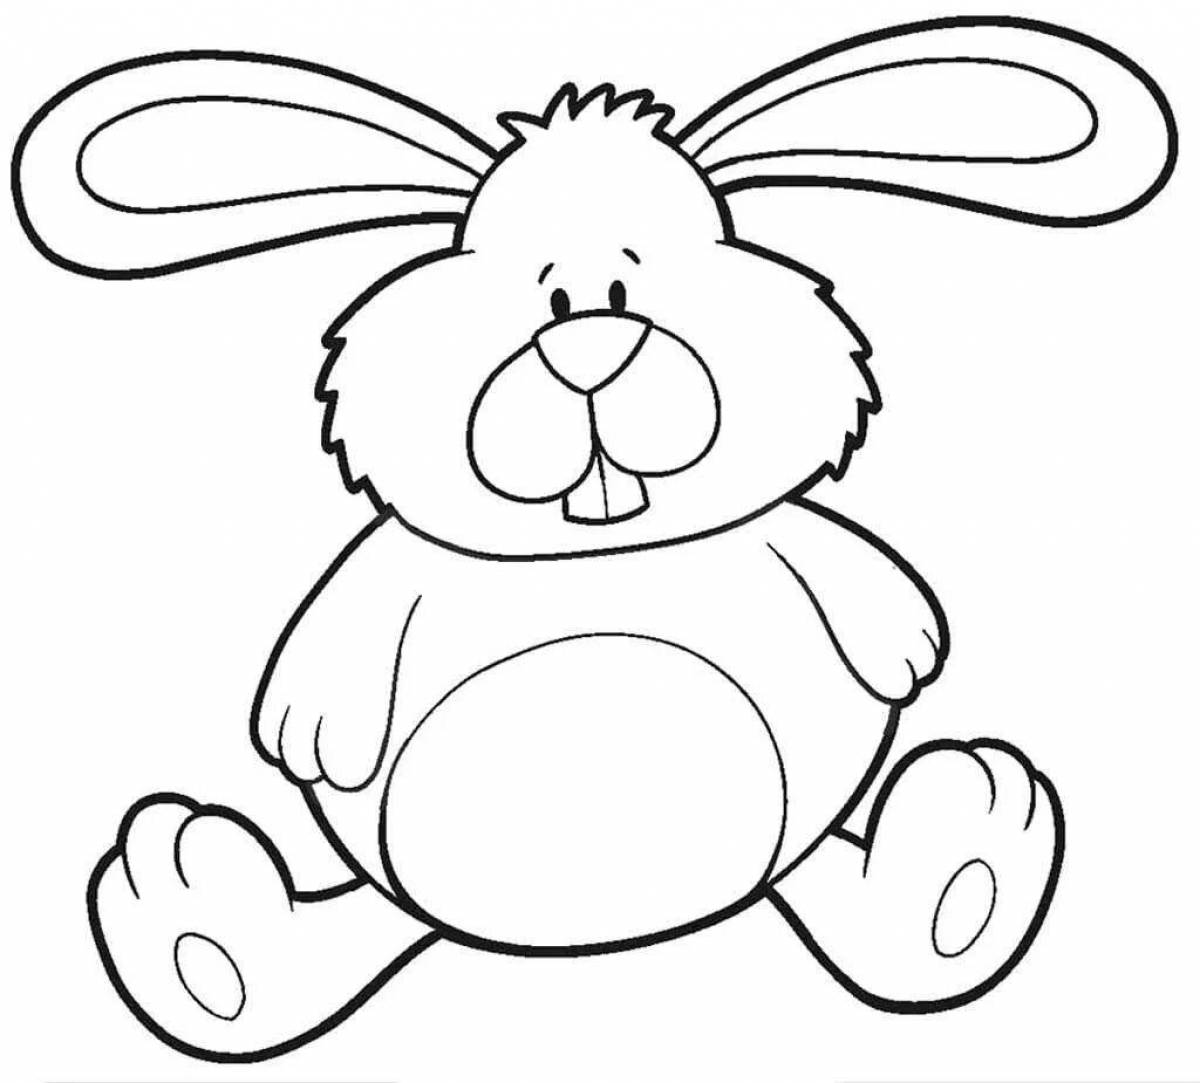 A fun drawing of a rabbit for children